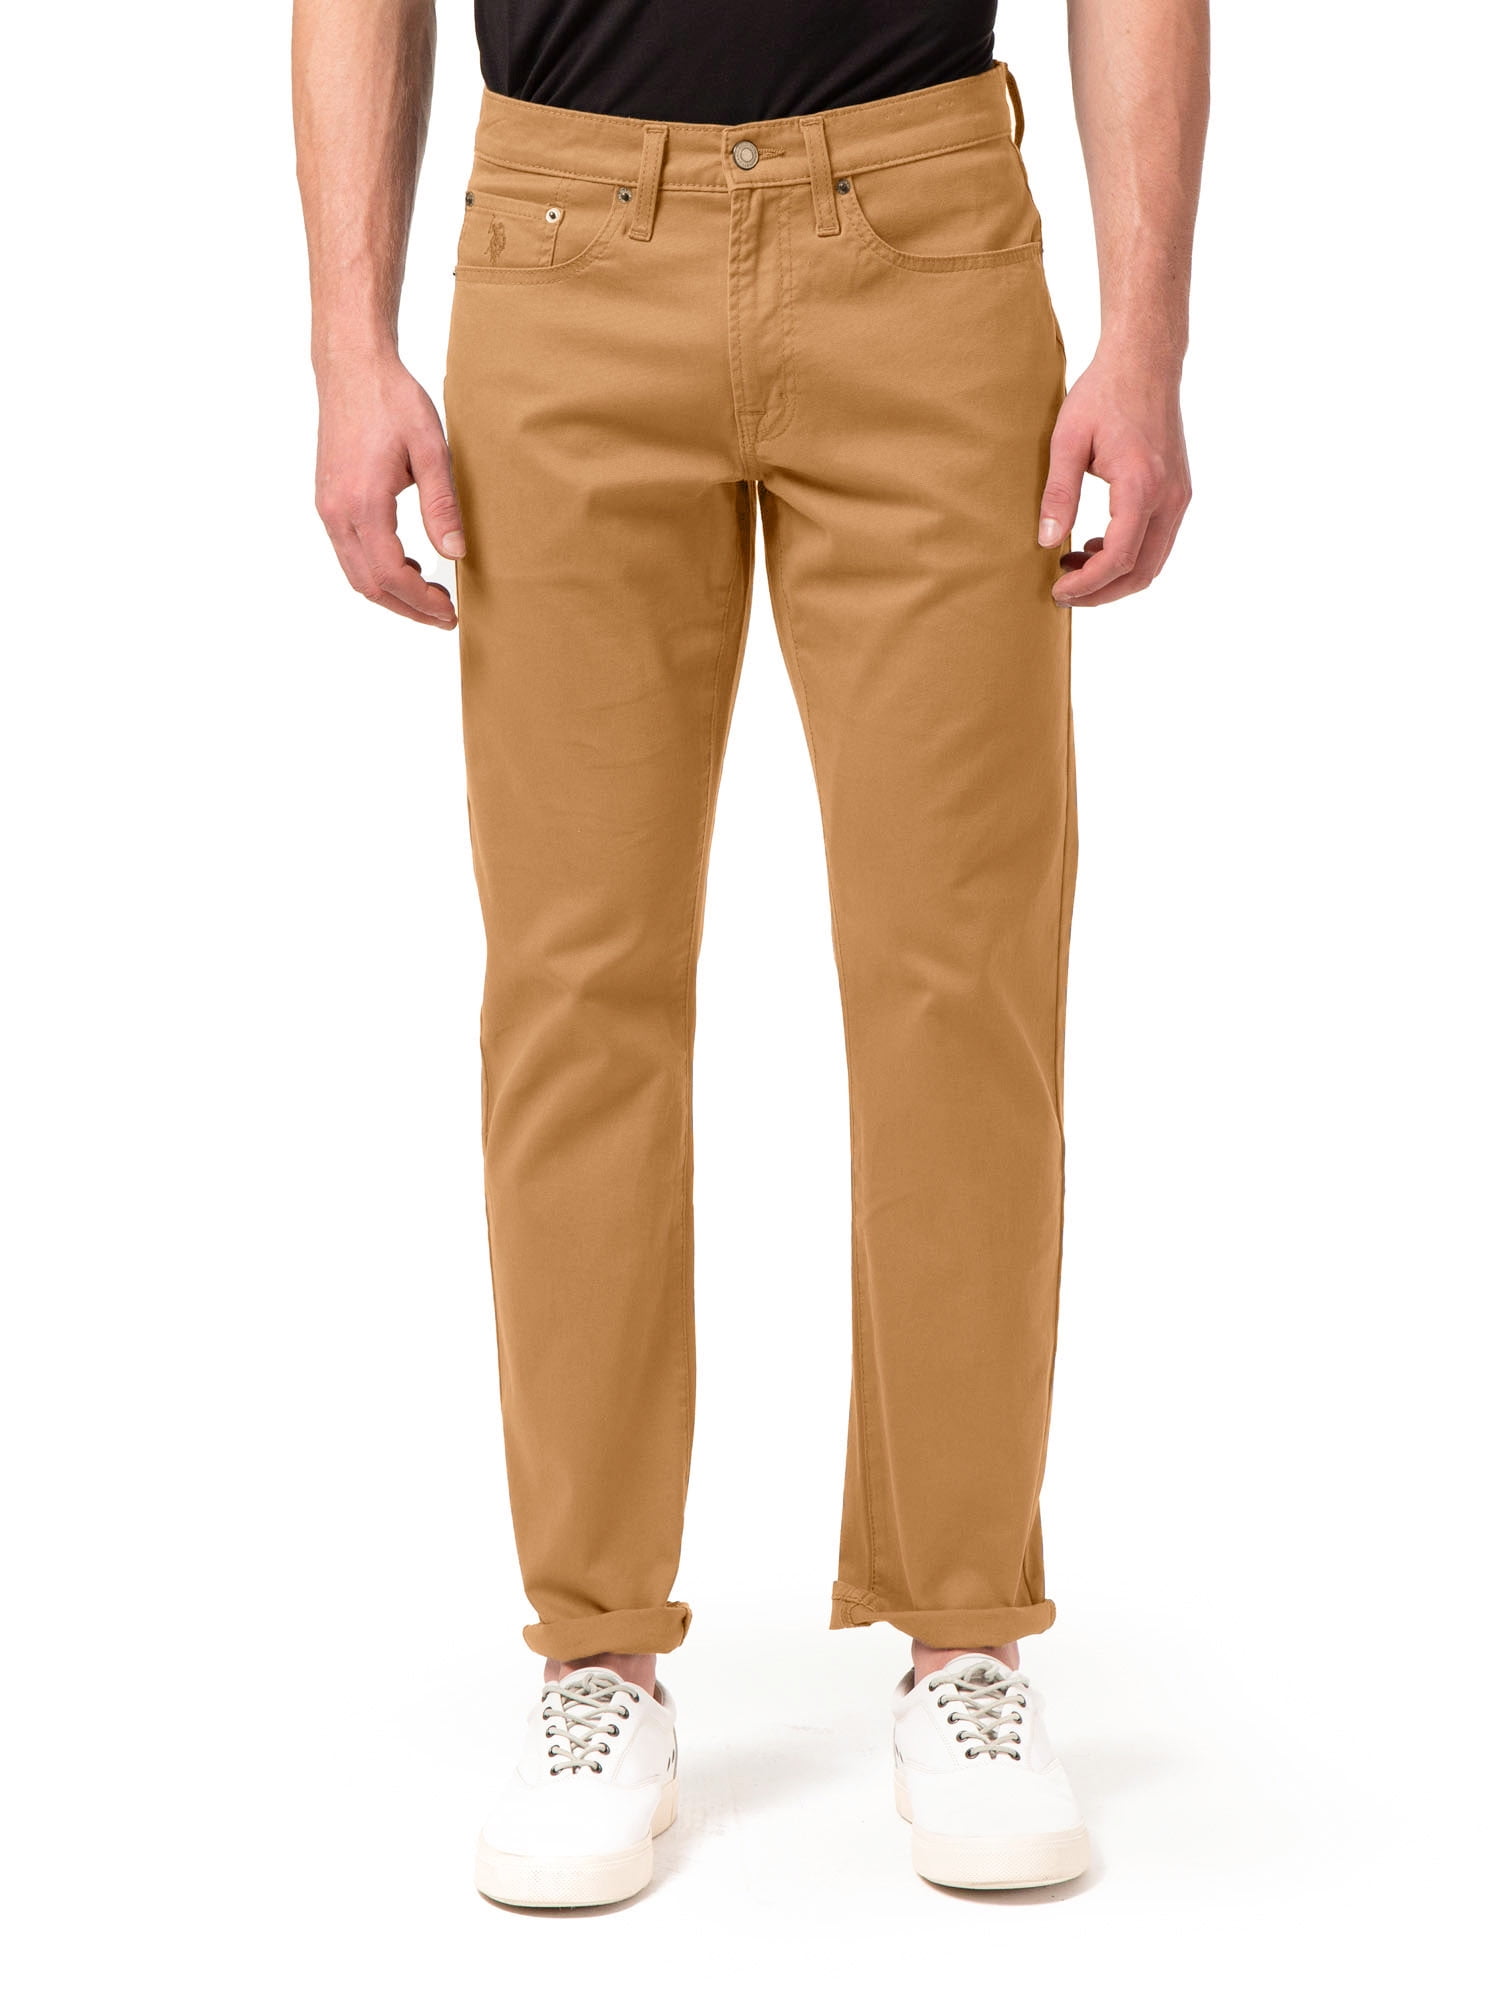 Buy U.S. Polo Assn. Twill Textured Casual Trousers - NNNOW.com